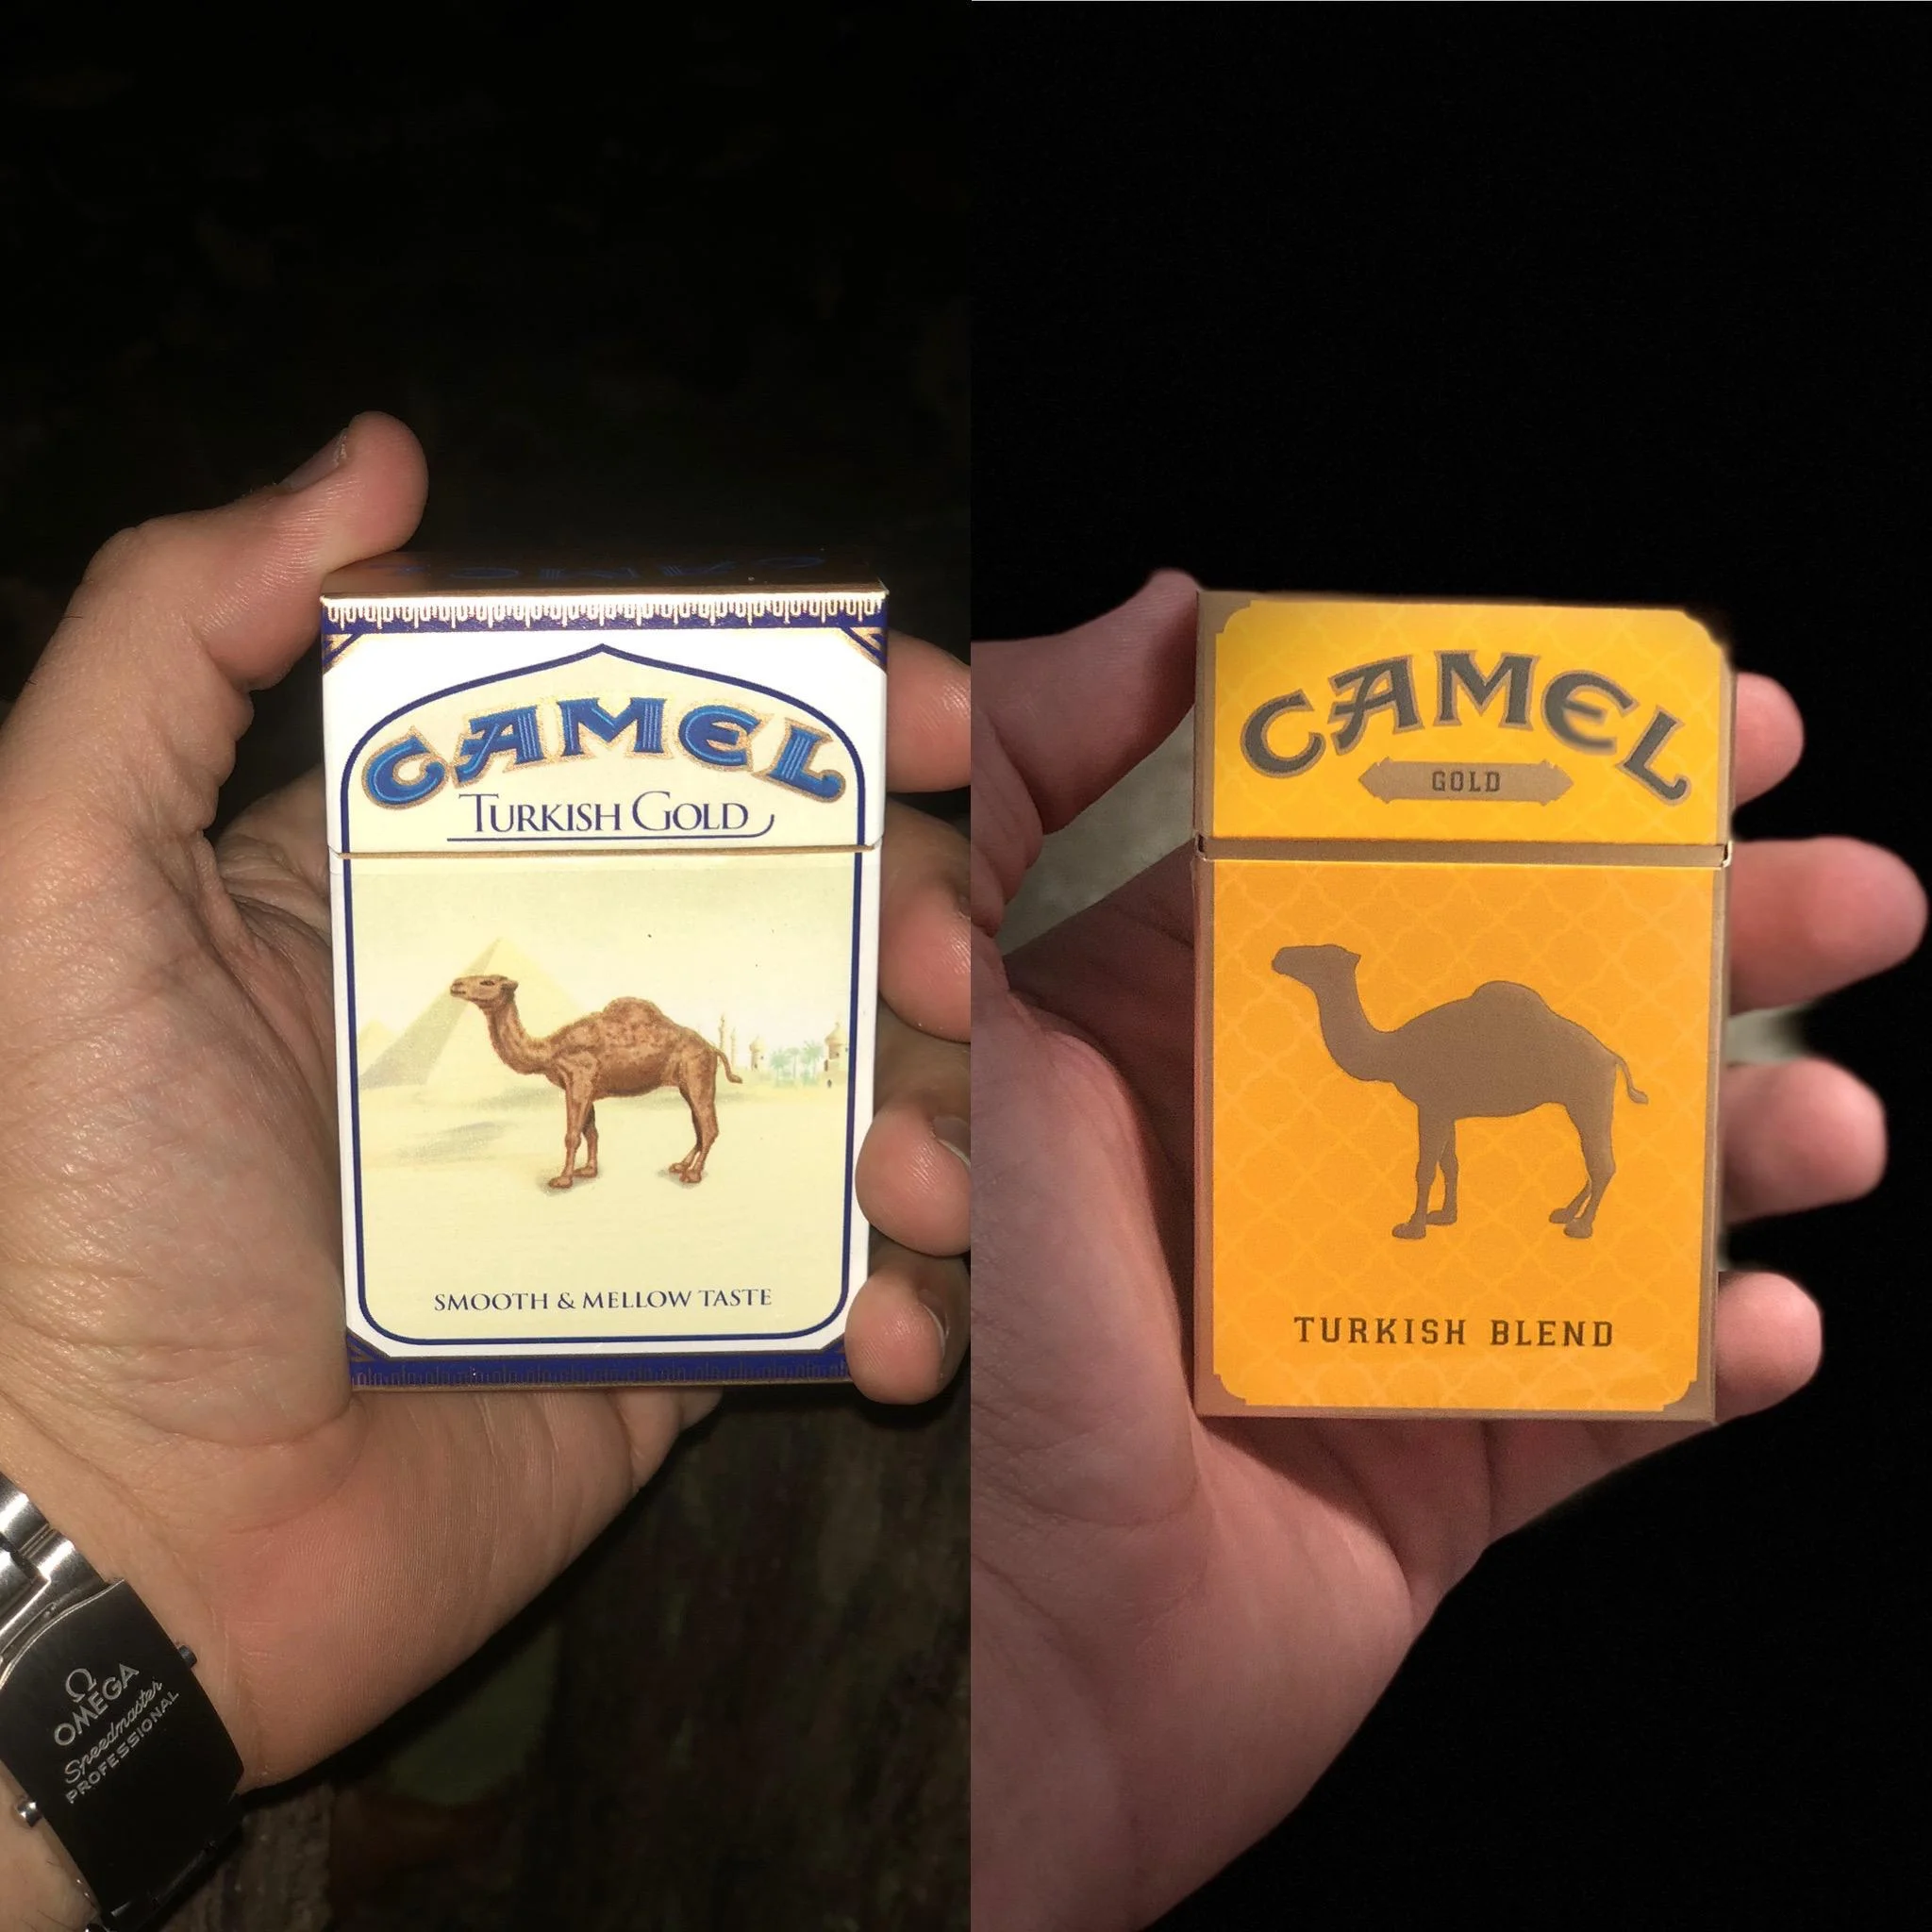 The Classic Flavor of Camel Cigarettes